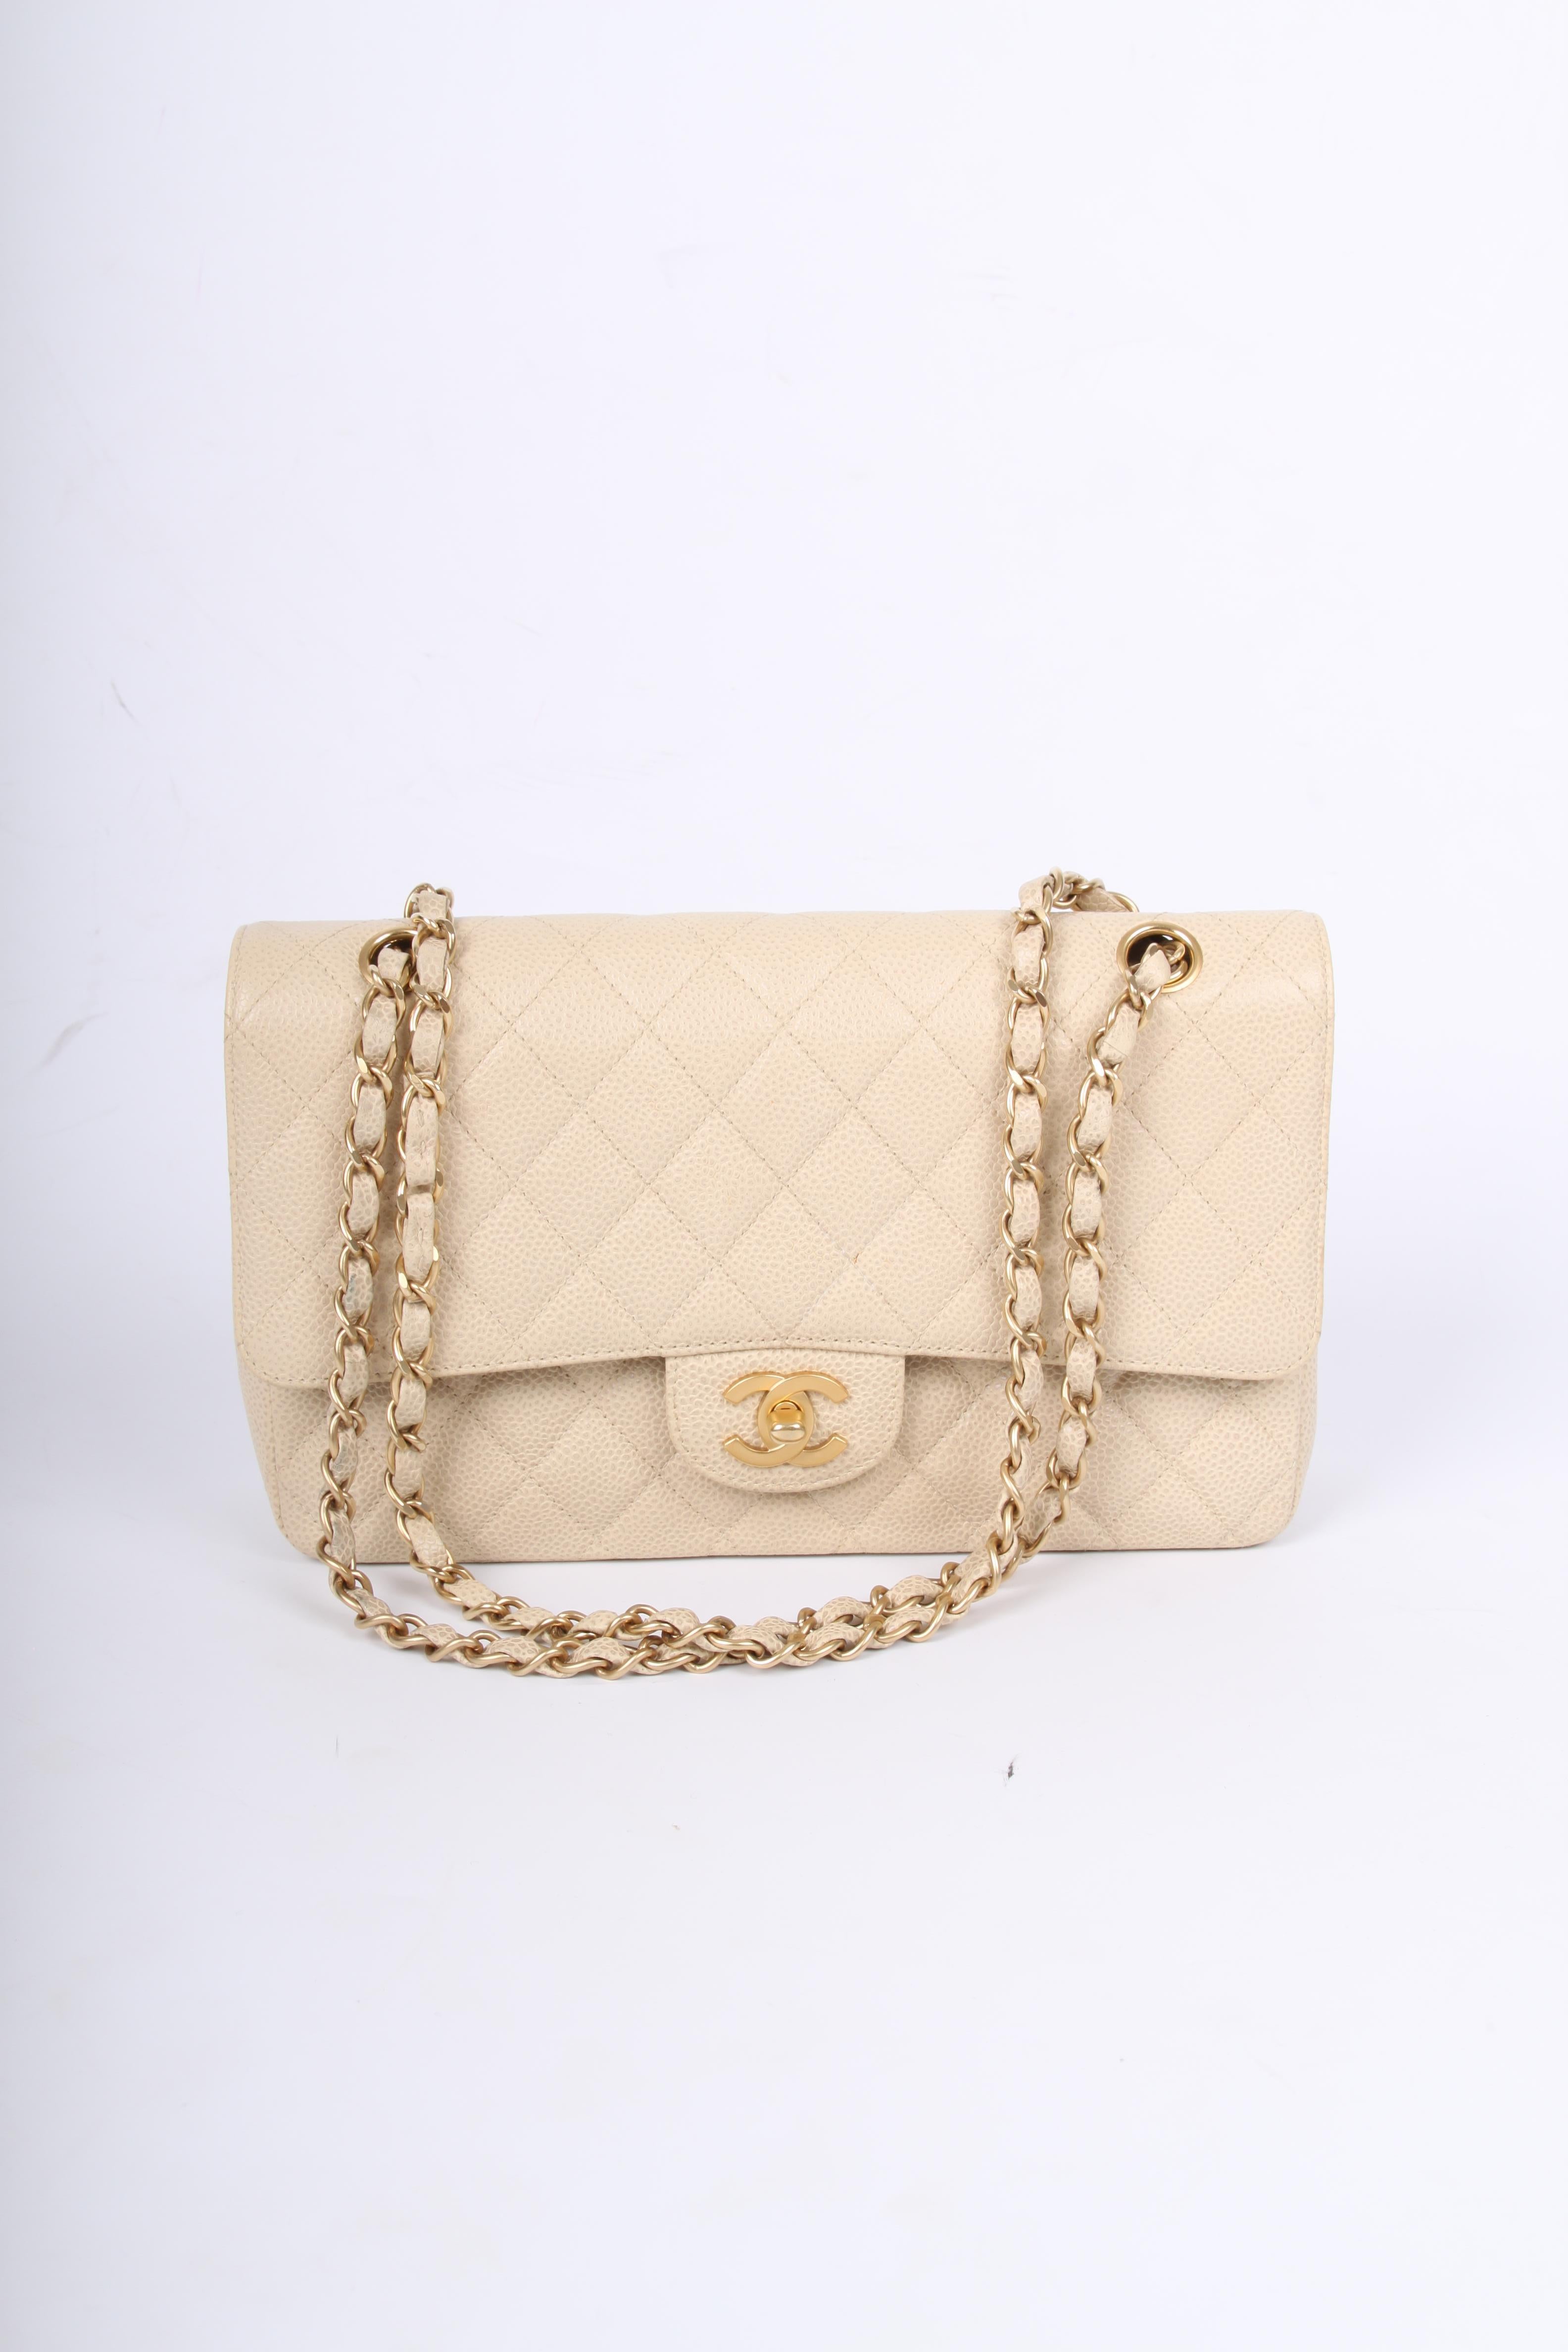 Classic bag by Chanel in very sandy beige caviar leather, this piece is like new!

This 2.55 medium double flap bag is the middle size of this classic model and measures 26 centimeters in length and is 16 centimeters high. A matte gold-tone chain